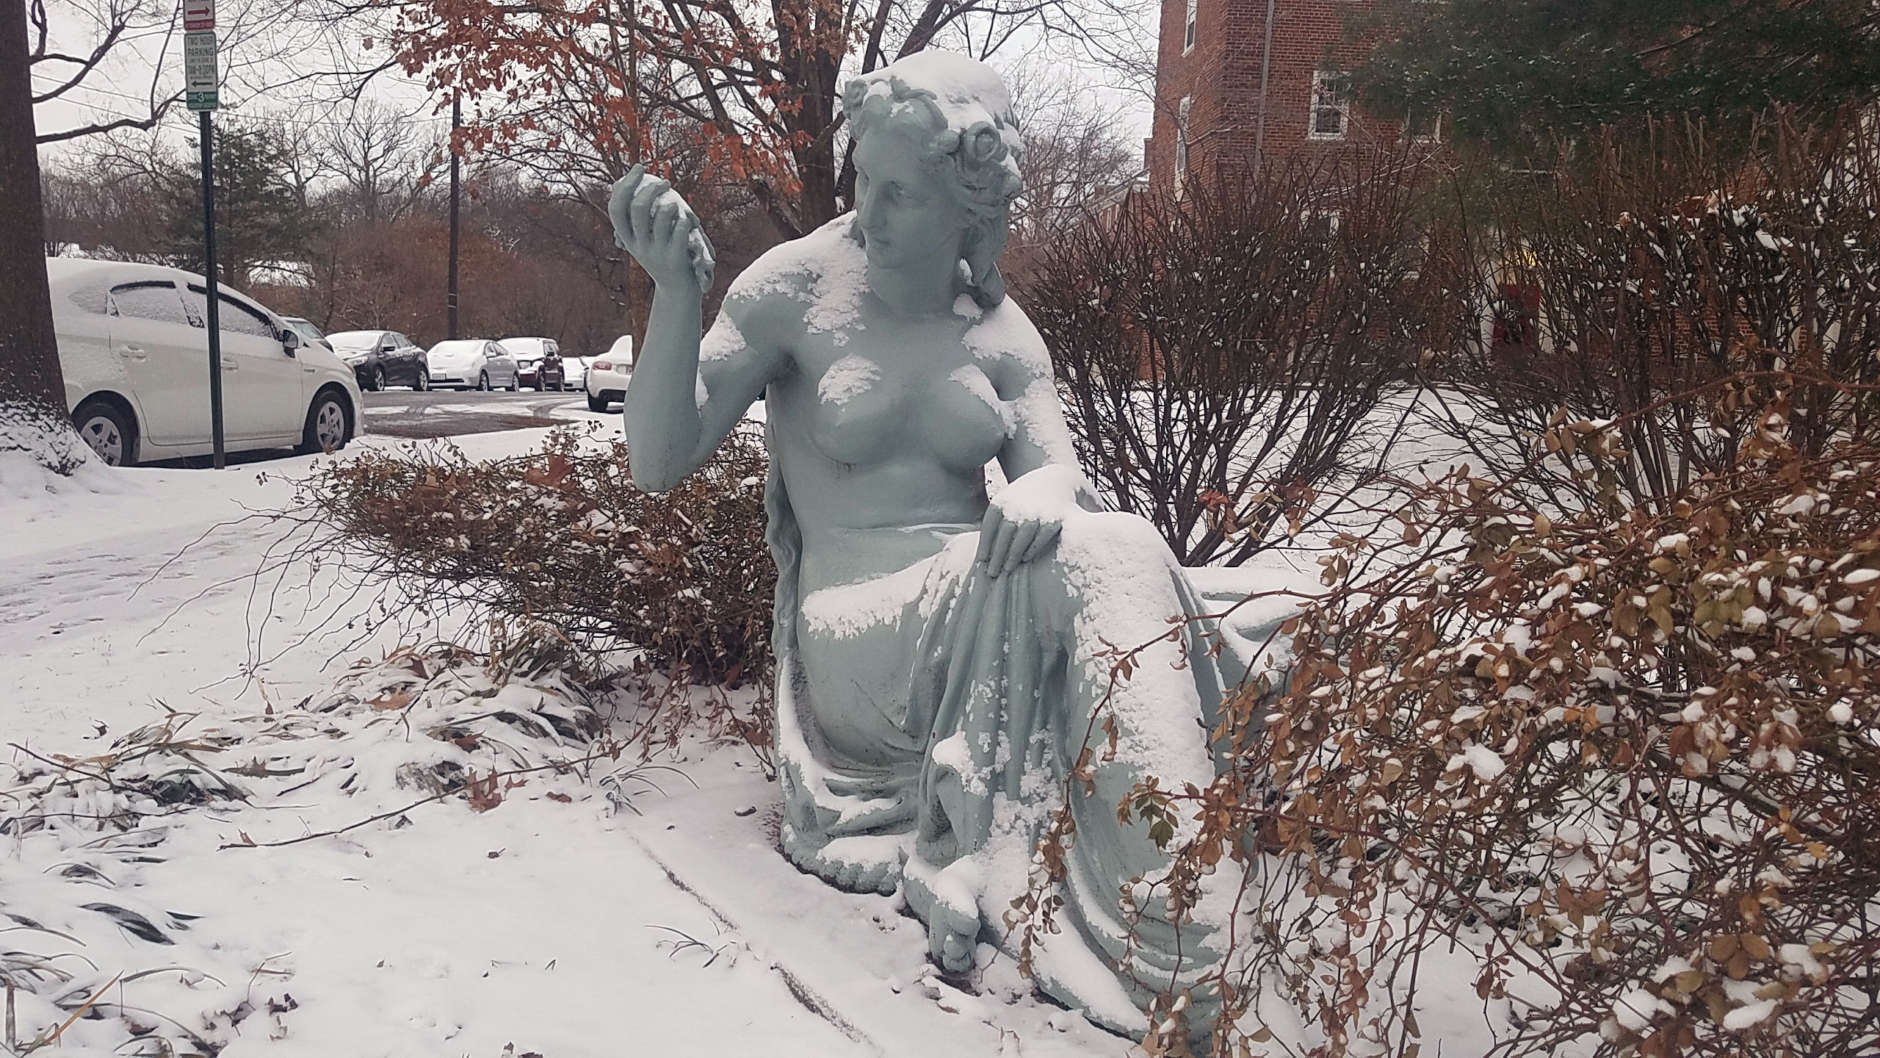 Snow sits on a statue in Northwest D.C. (WTOP/William Vitka)